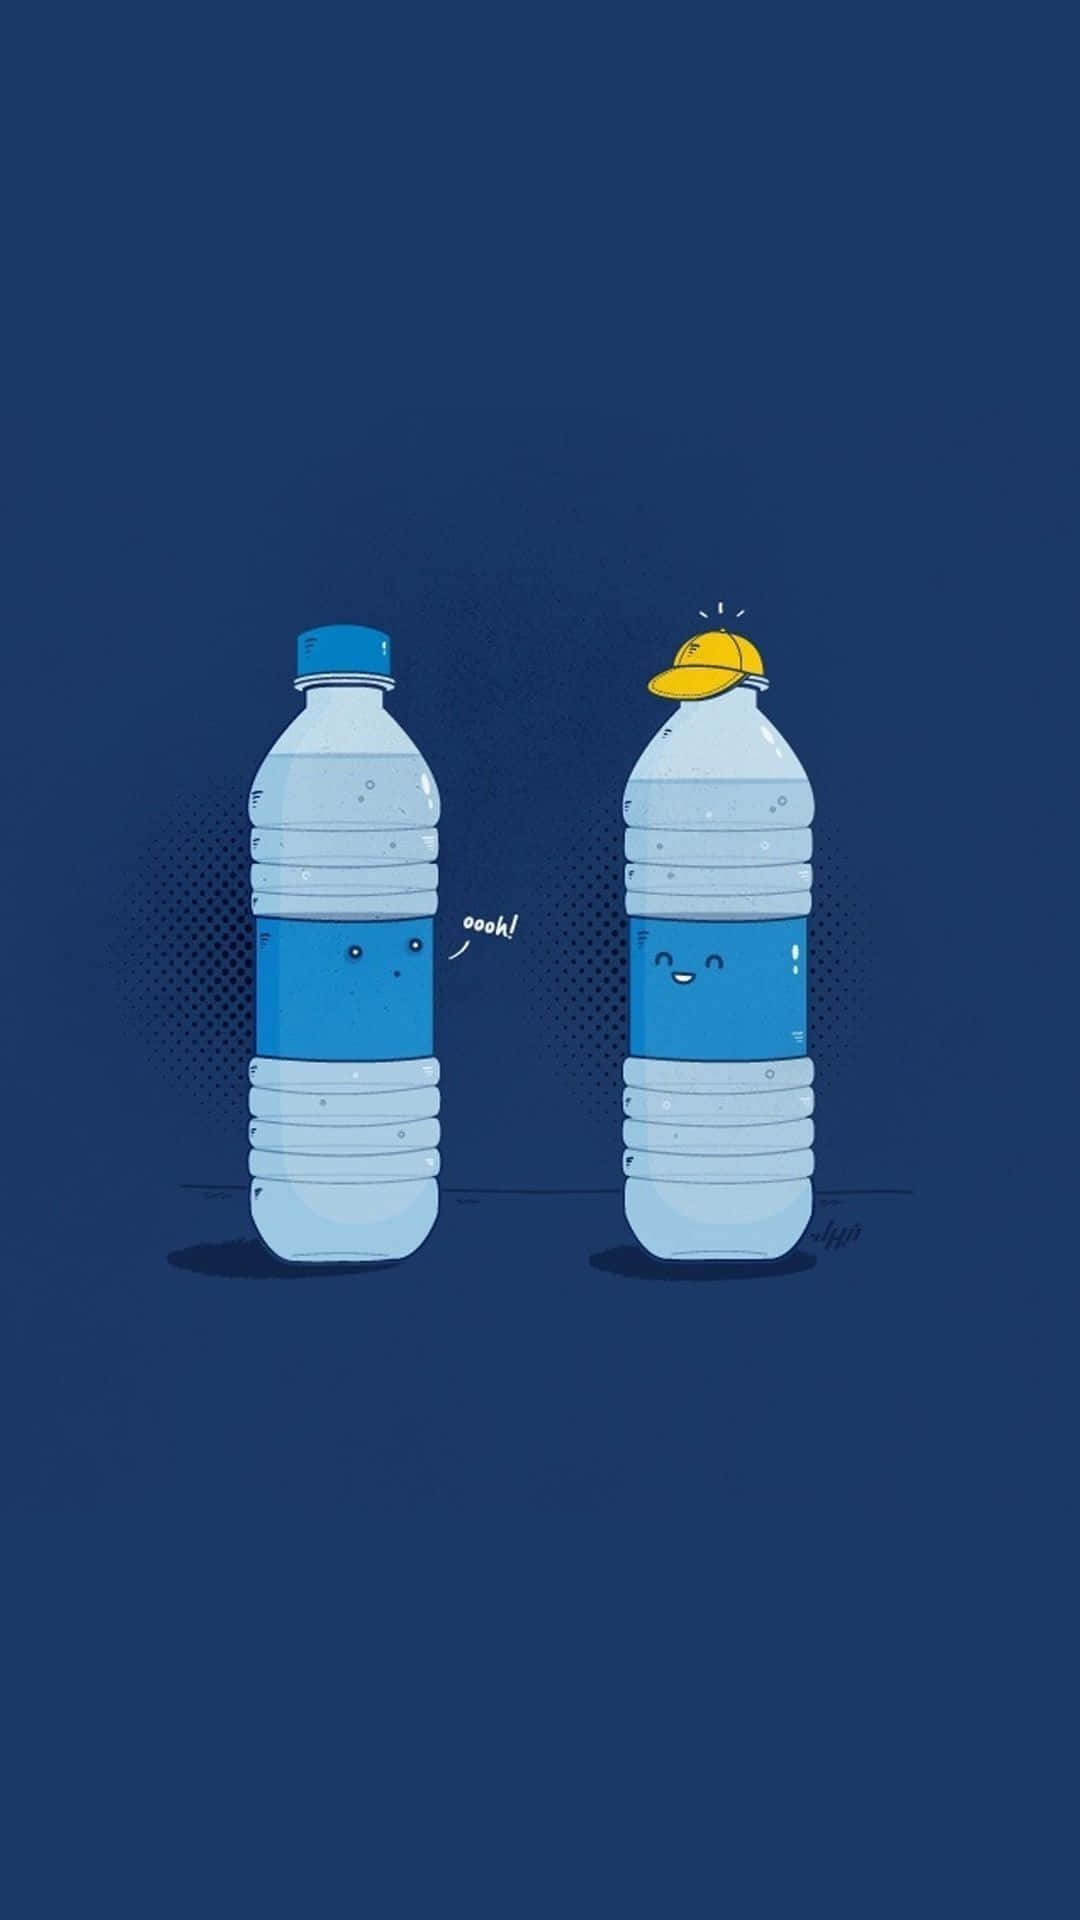 Clever Iphone Water Bottle Wallpaper